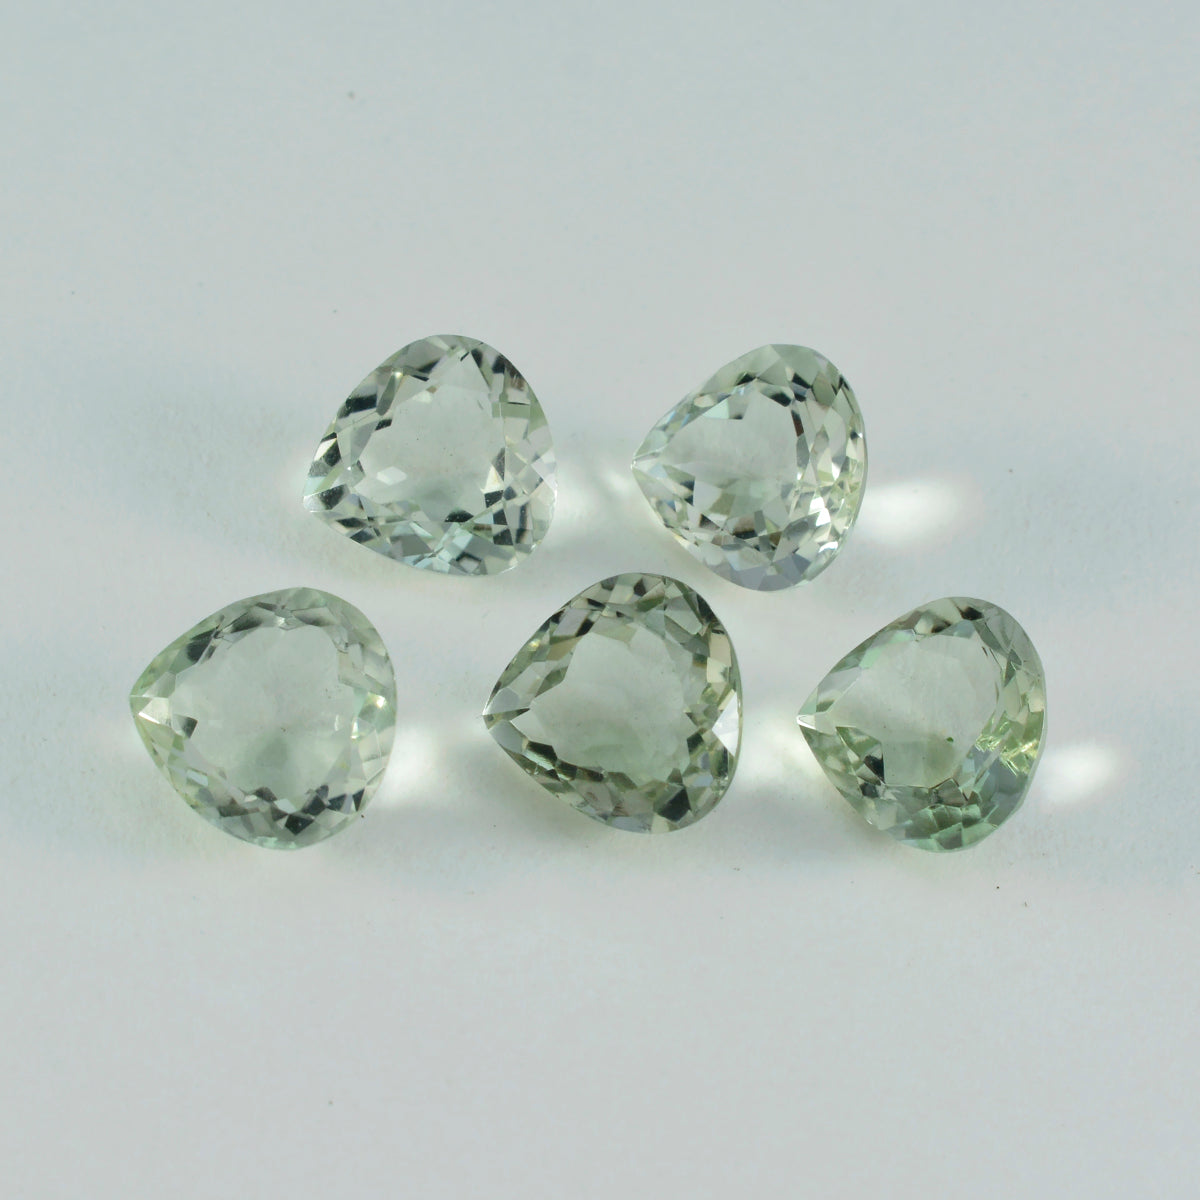 Riyogems 1PC Green Amethyst Faceted 14x14 mm Heart Shape attractive Quality Loose Gems